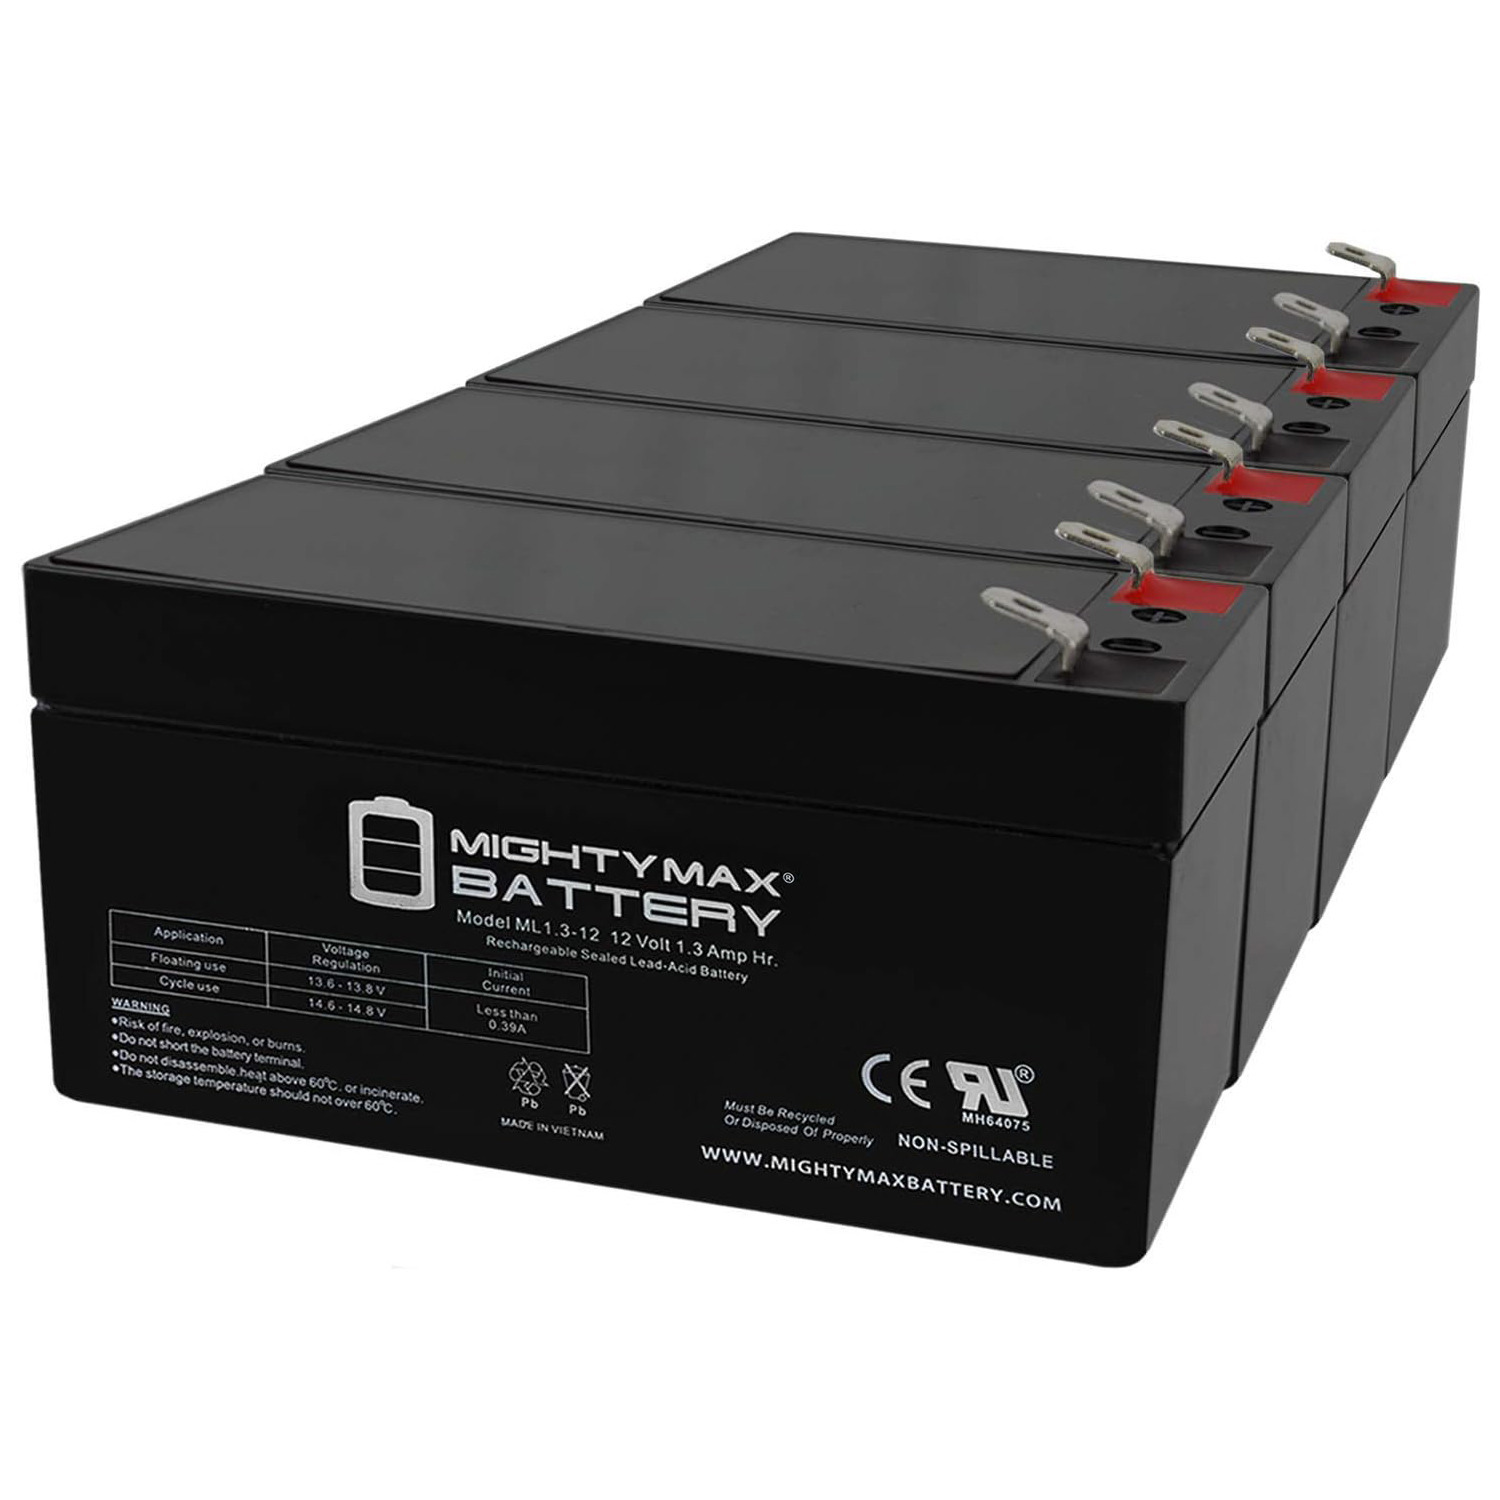 12V 1.3Ah Replacement Battery for Aokly Power 6-FM-1.3 - 4 Pack